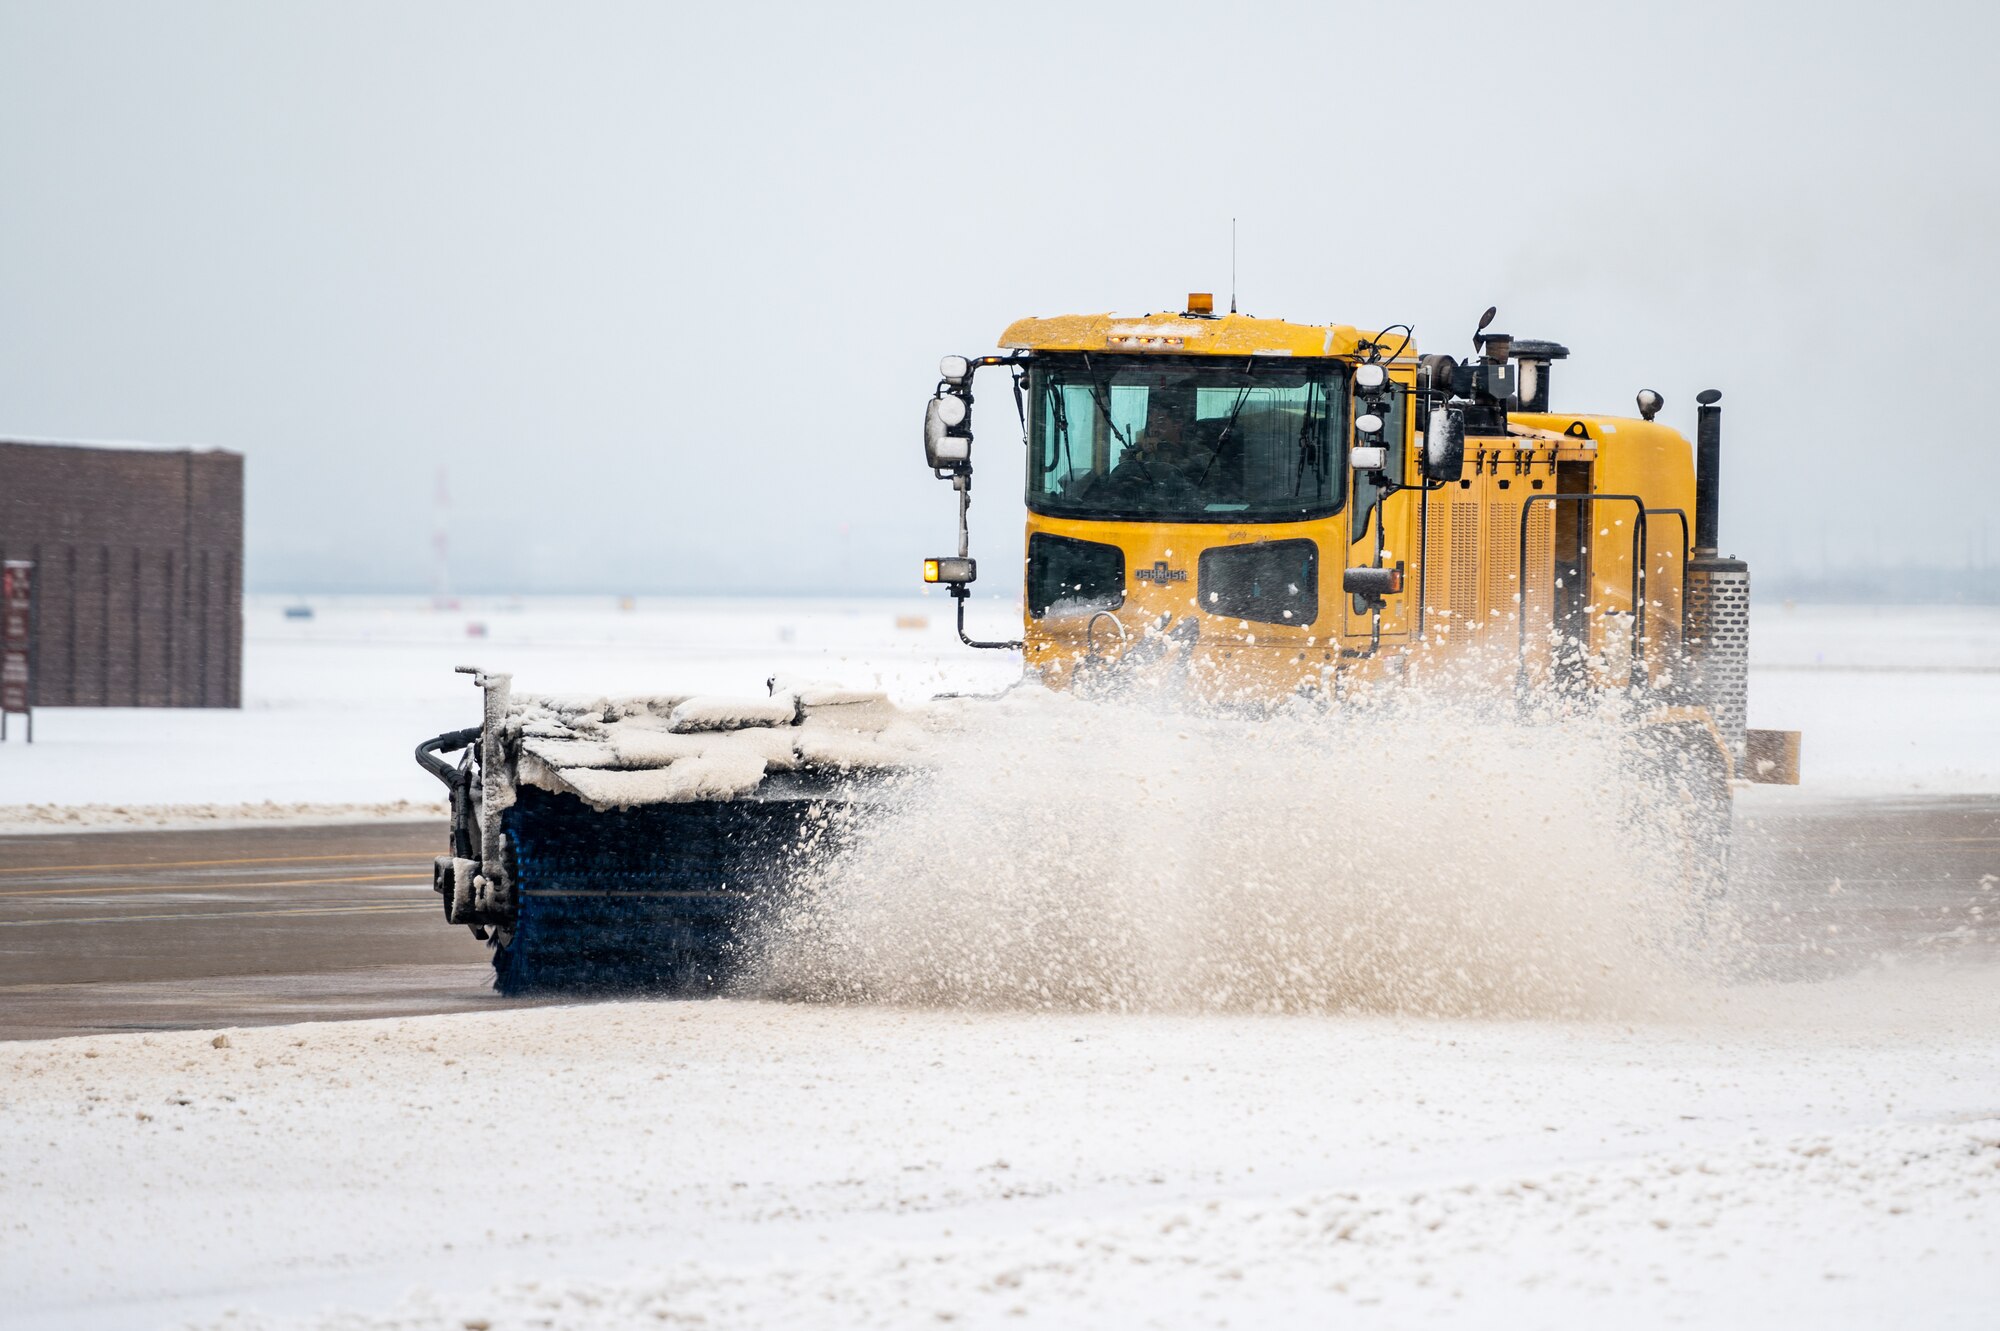 A 51st Civil Engineer Squadron Airman clears snow from a taxiway at Osan Air Base, Republic of Korea, Dec. 15, 2022.